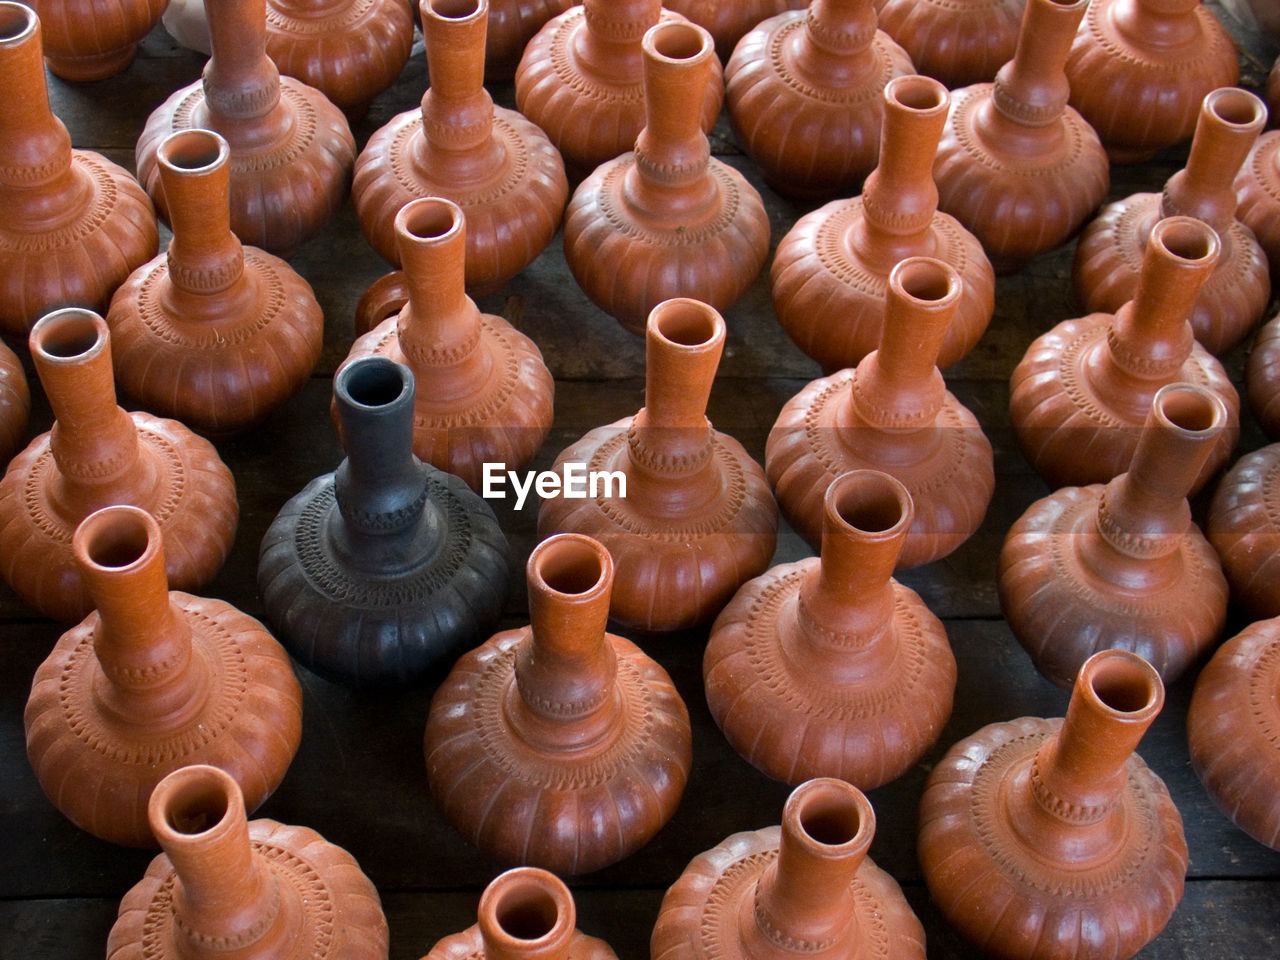 High angle view of wooden vase for sale at market